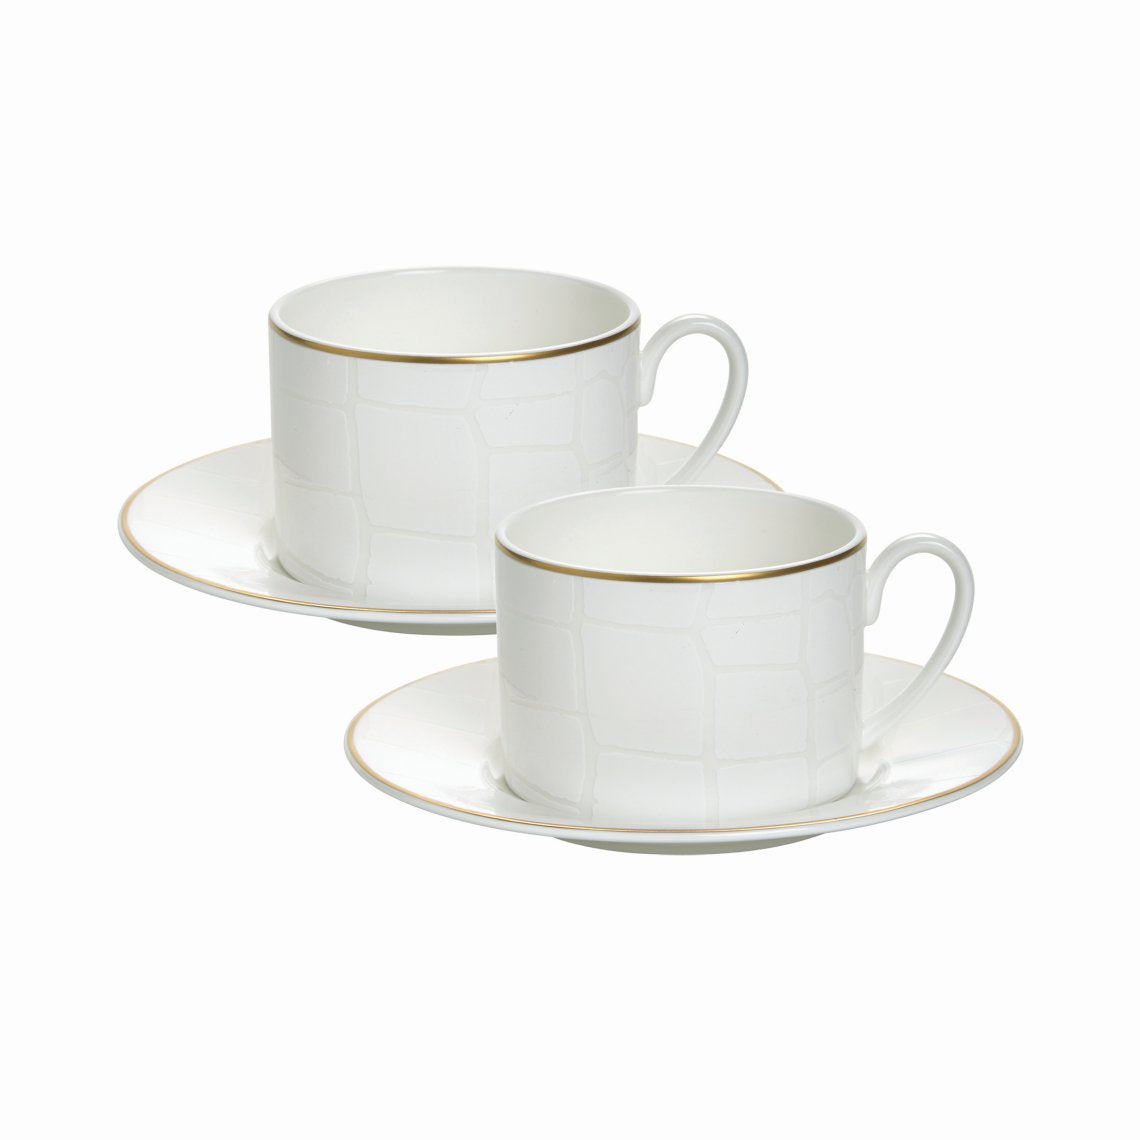 Alligator White Set of 2, Cups & Saucers White Background Photo